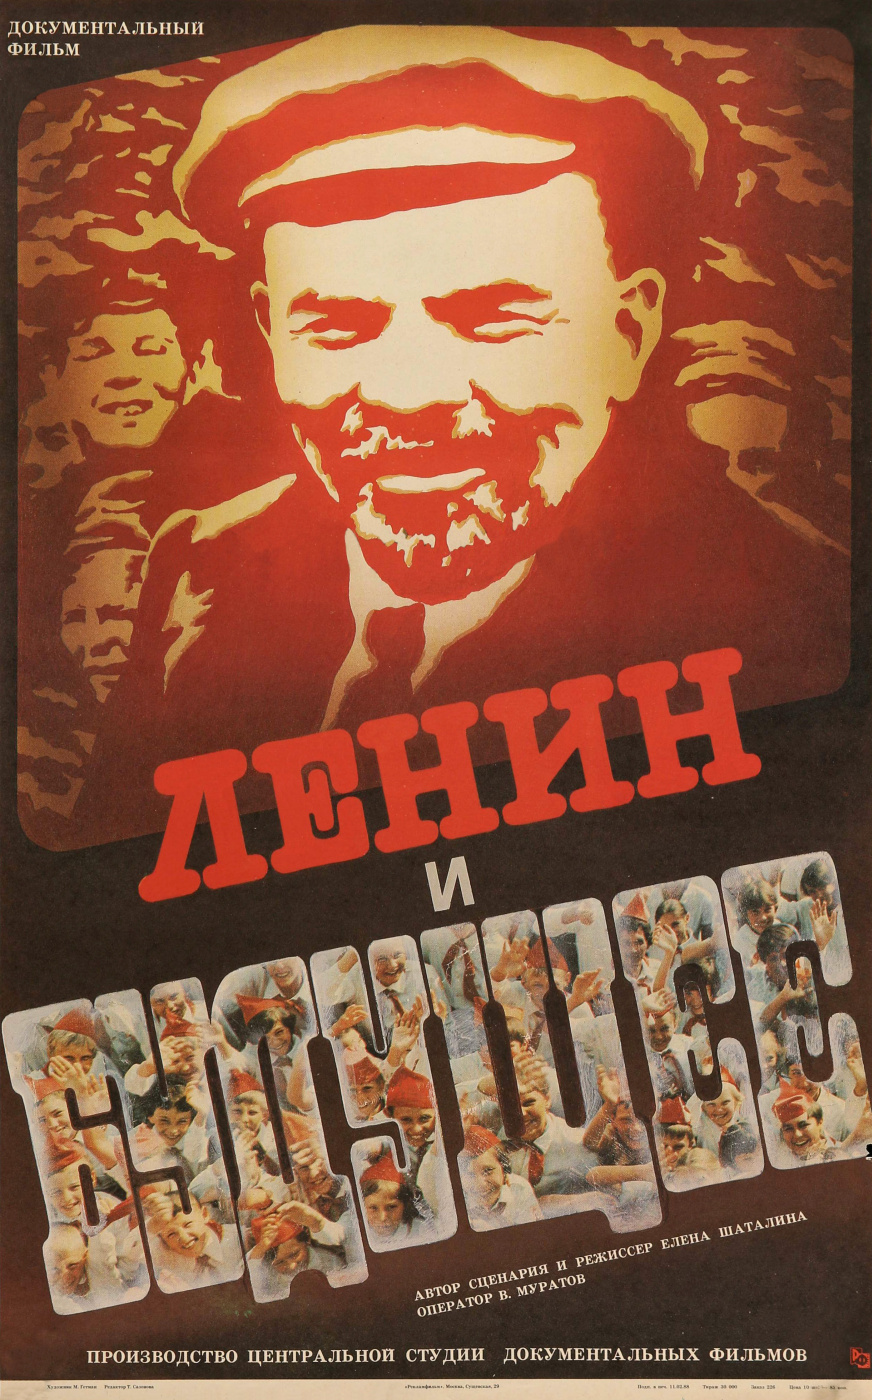 Mikhail Anatolyevich Hetman. Lenin and the future : a feature film